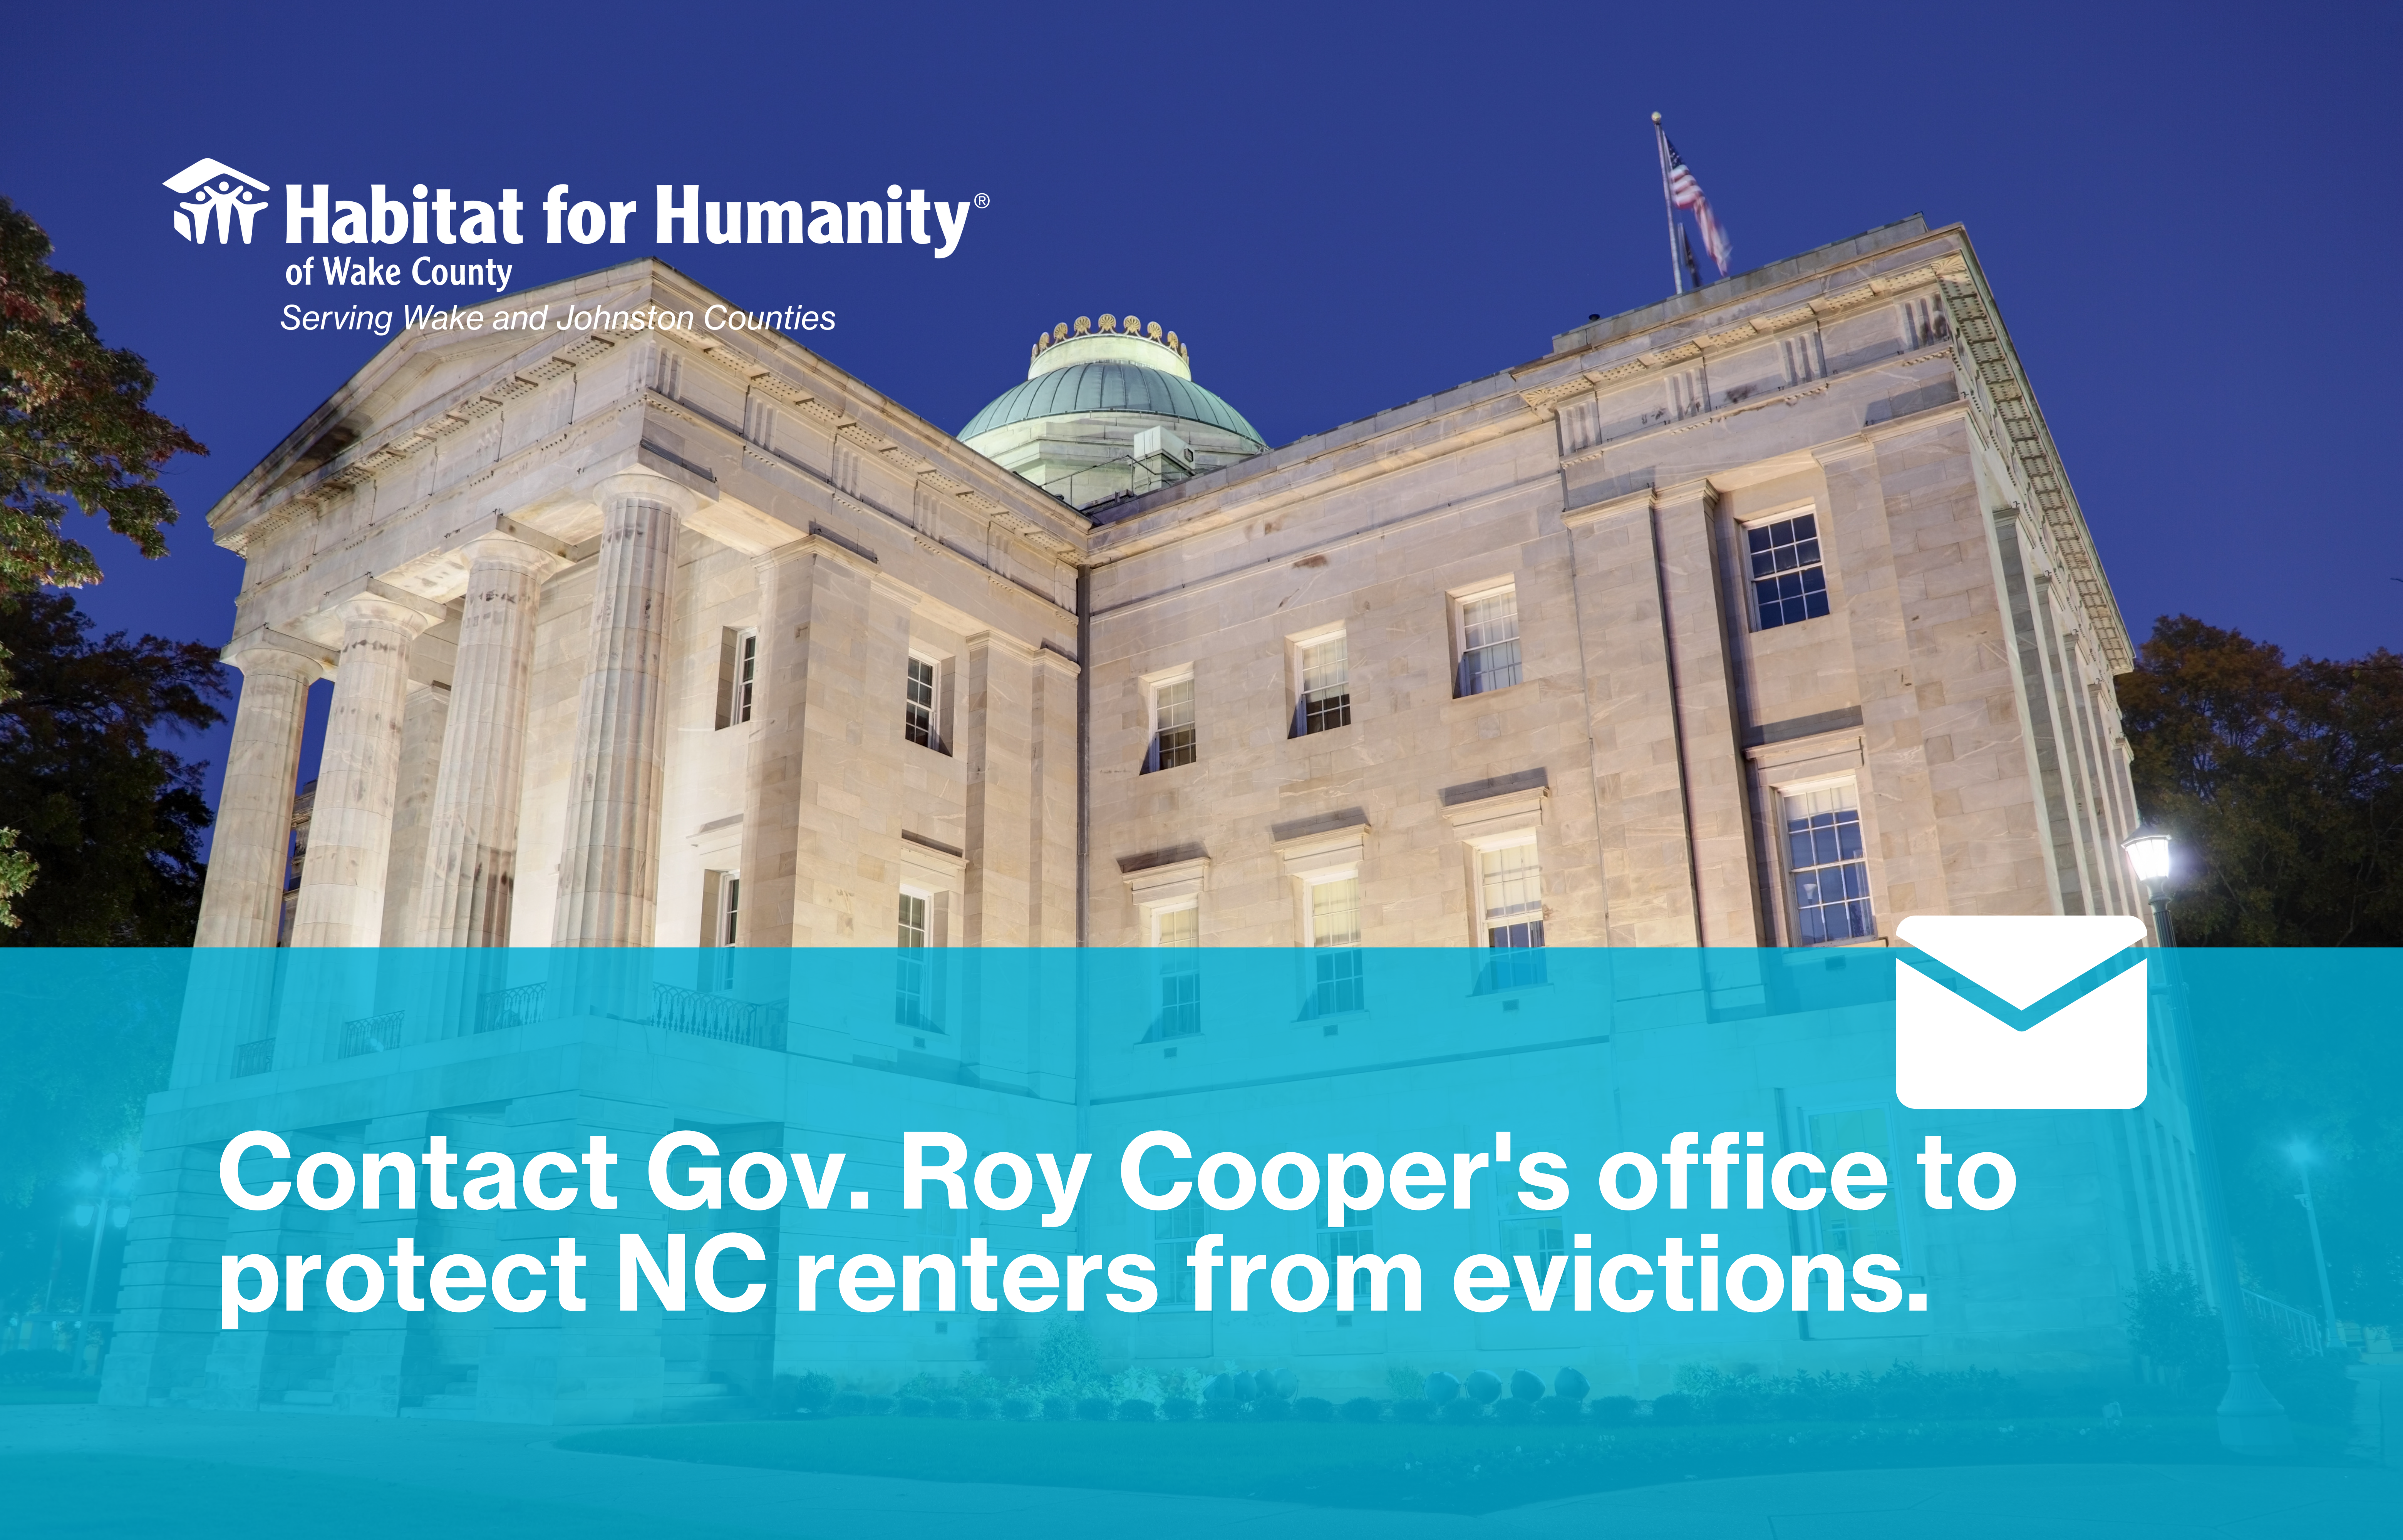 Contact Governor Coopers office today to protect NC families from evictions